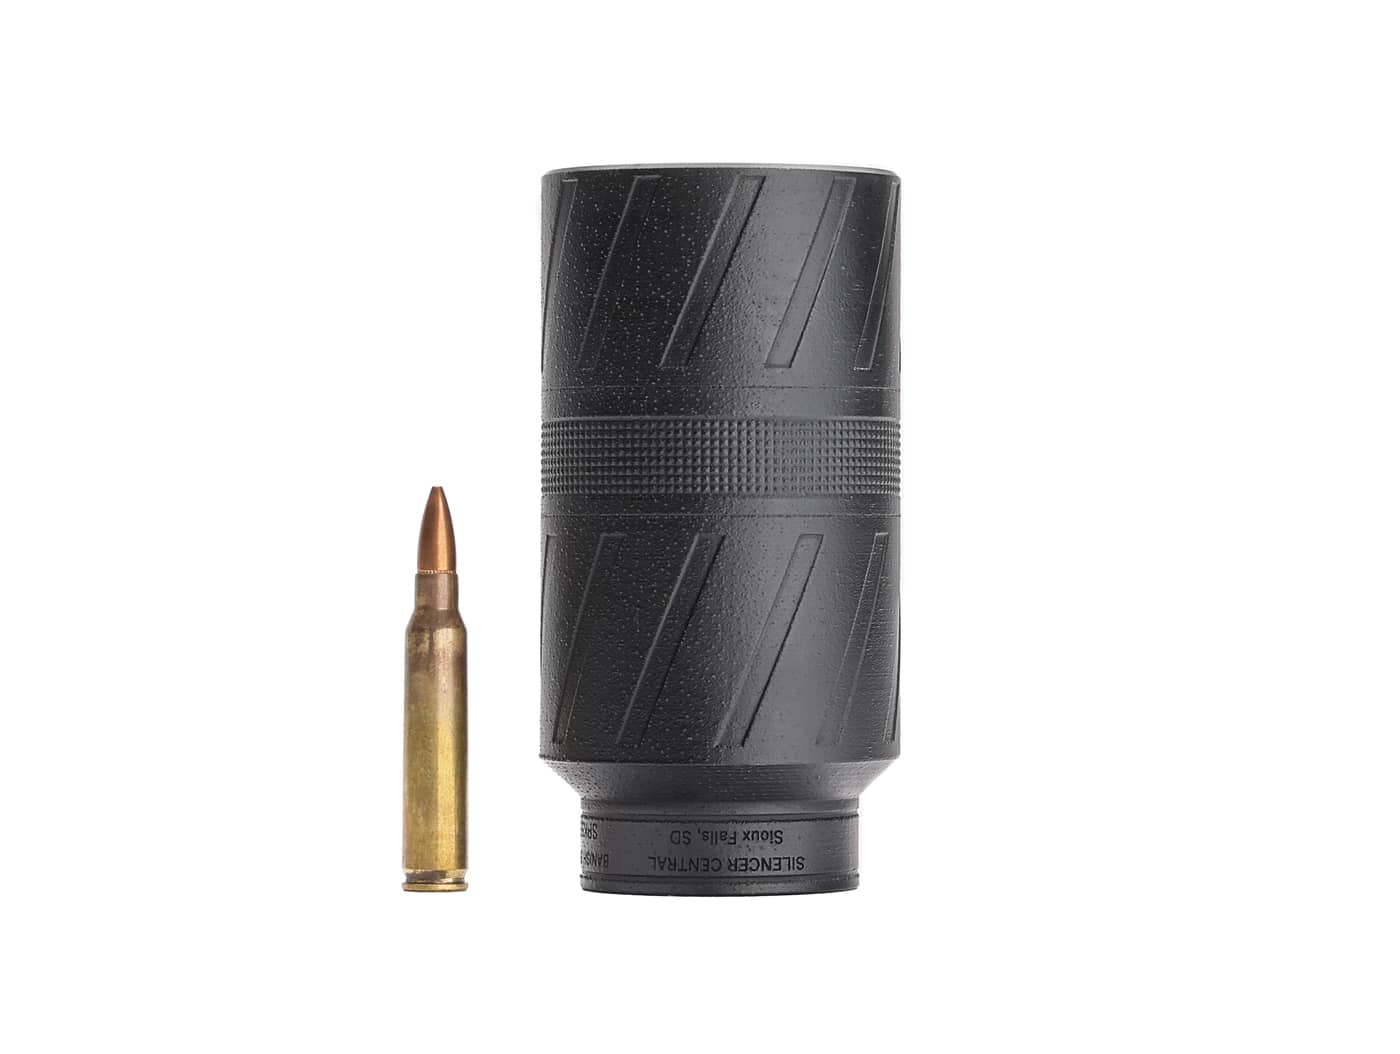 compact size of Speed K suppressor shown with 556 NATO cartridge